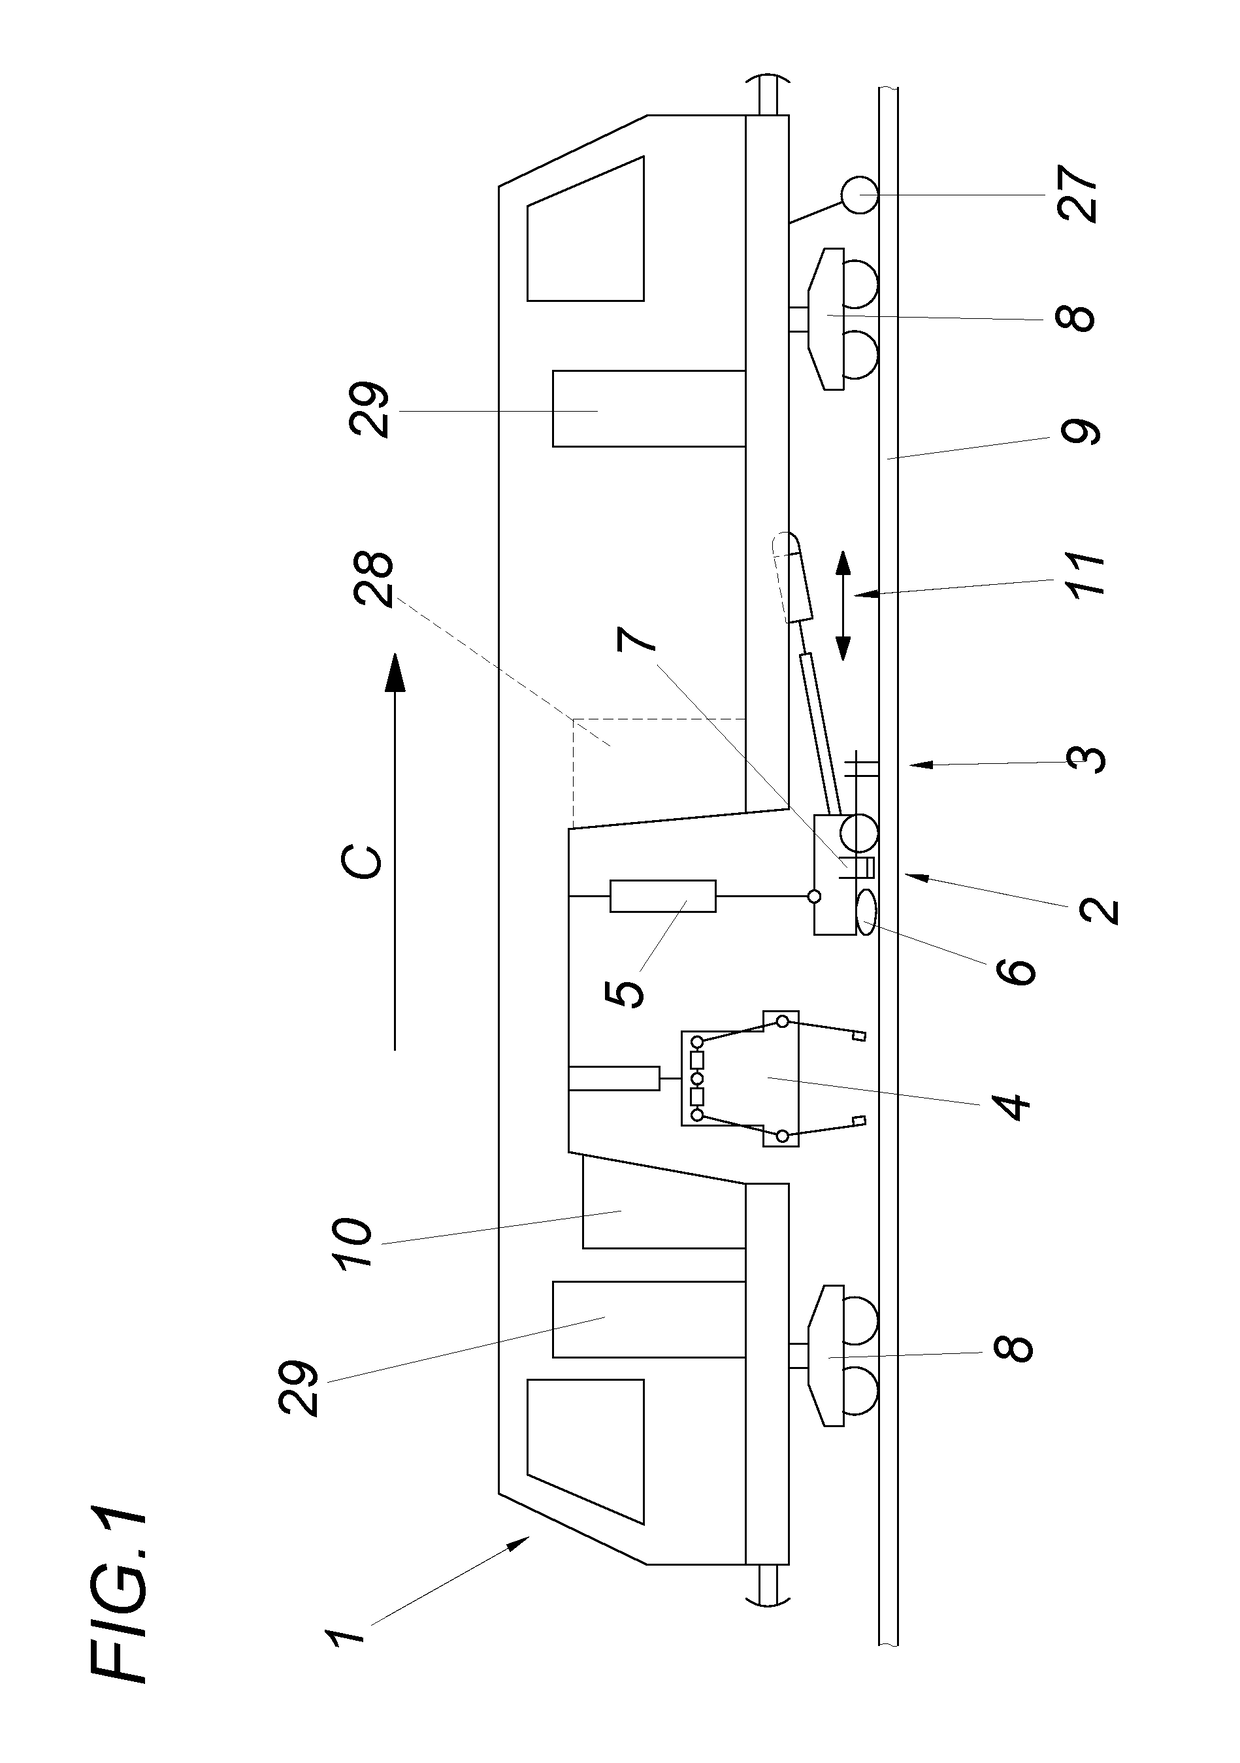 Method and device for compacting the ballast bed of a track